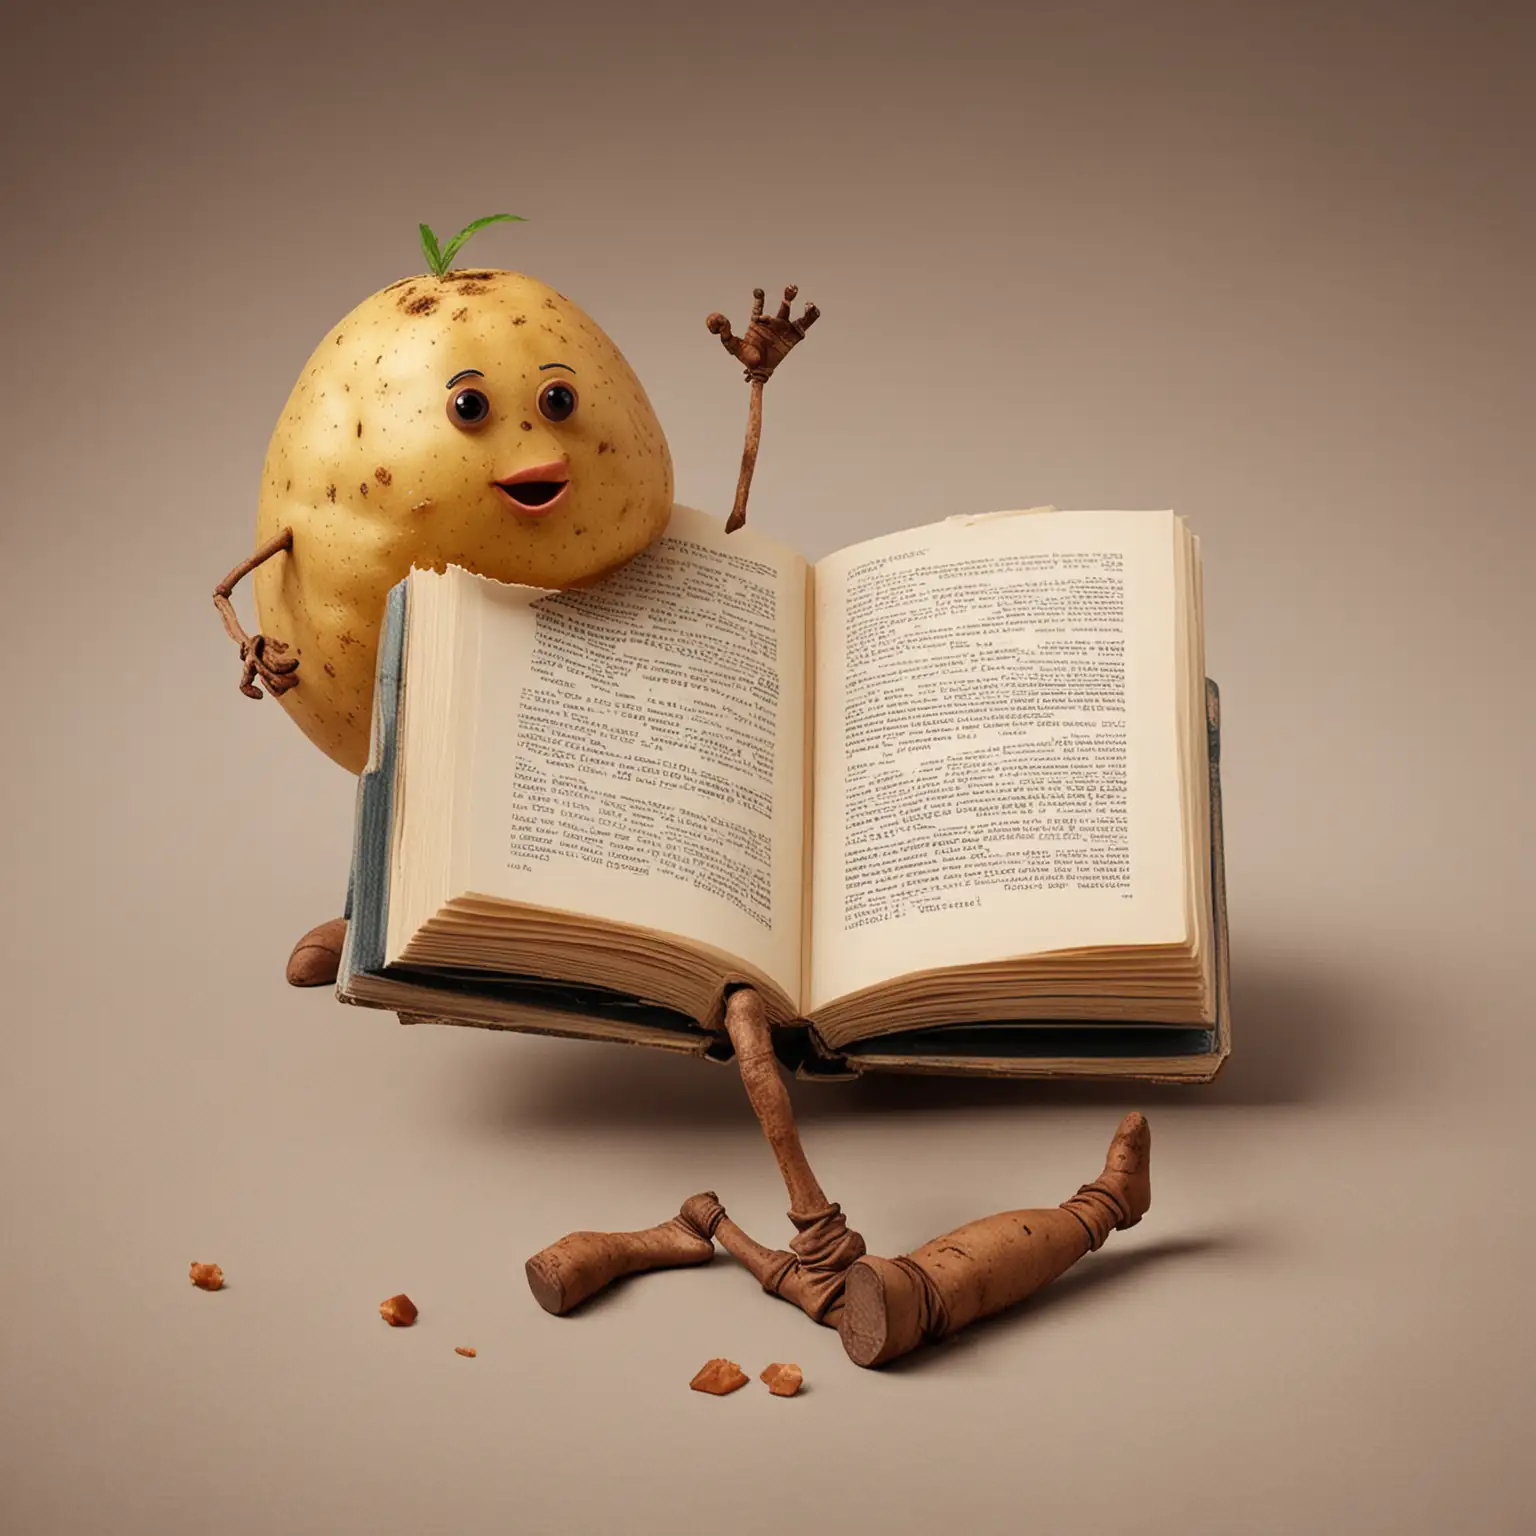 Potato Reading a Book with Legs